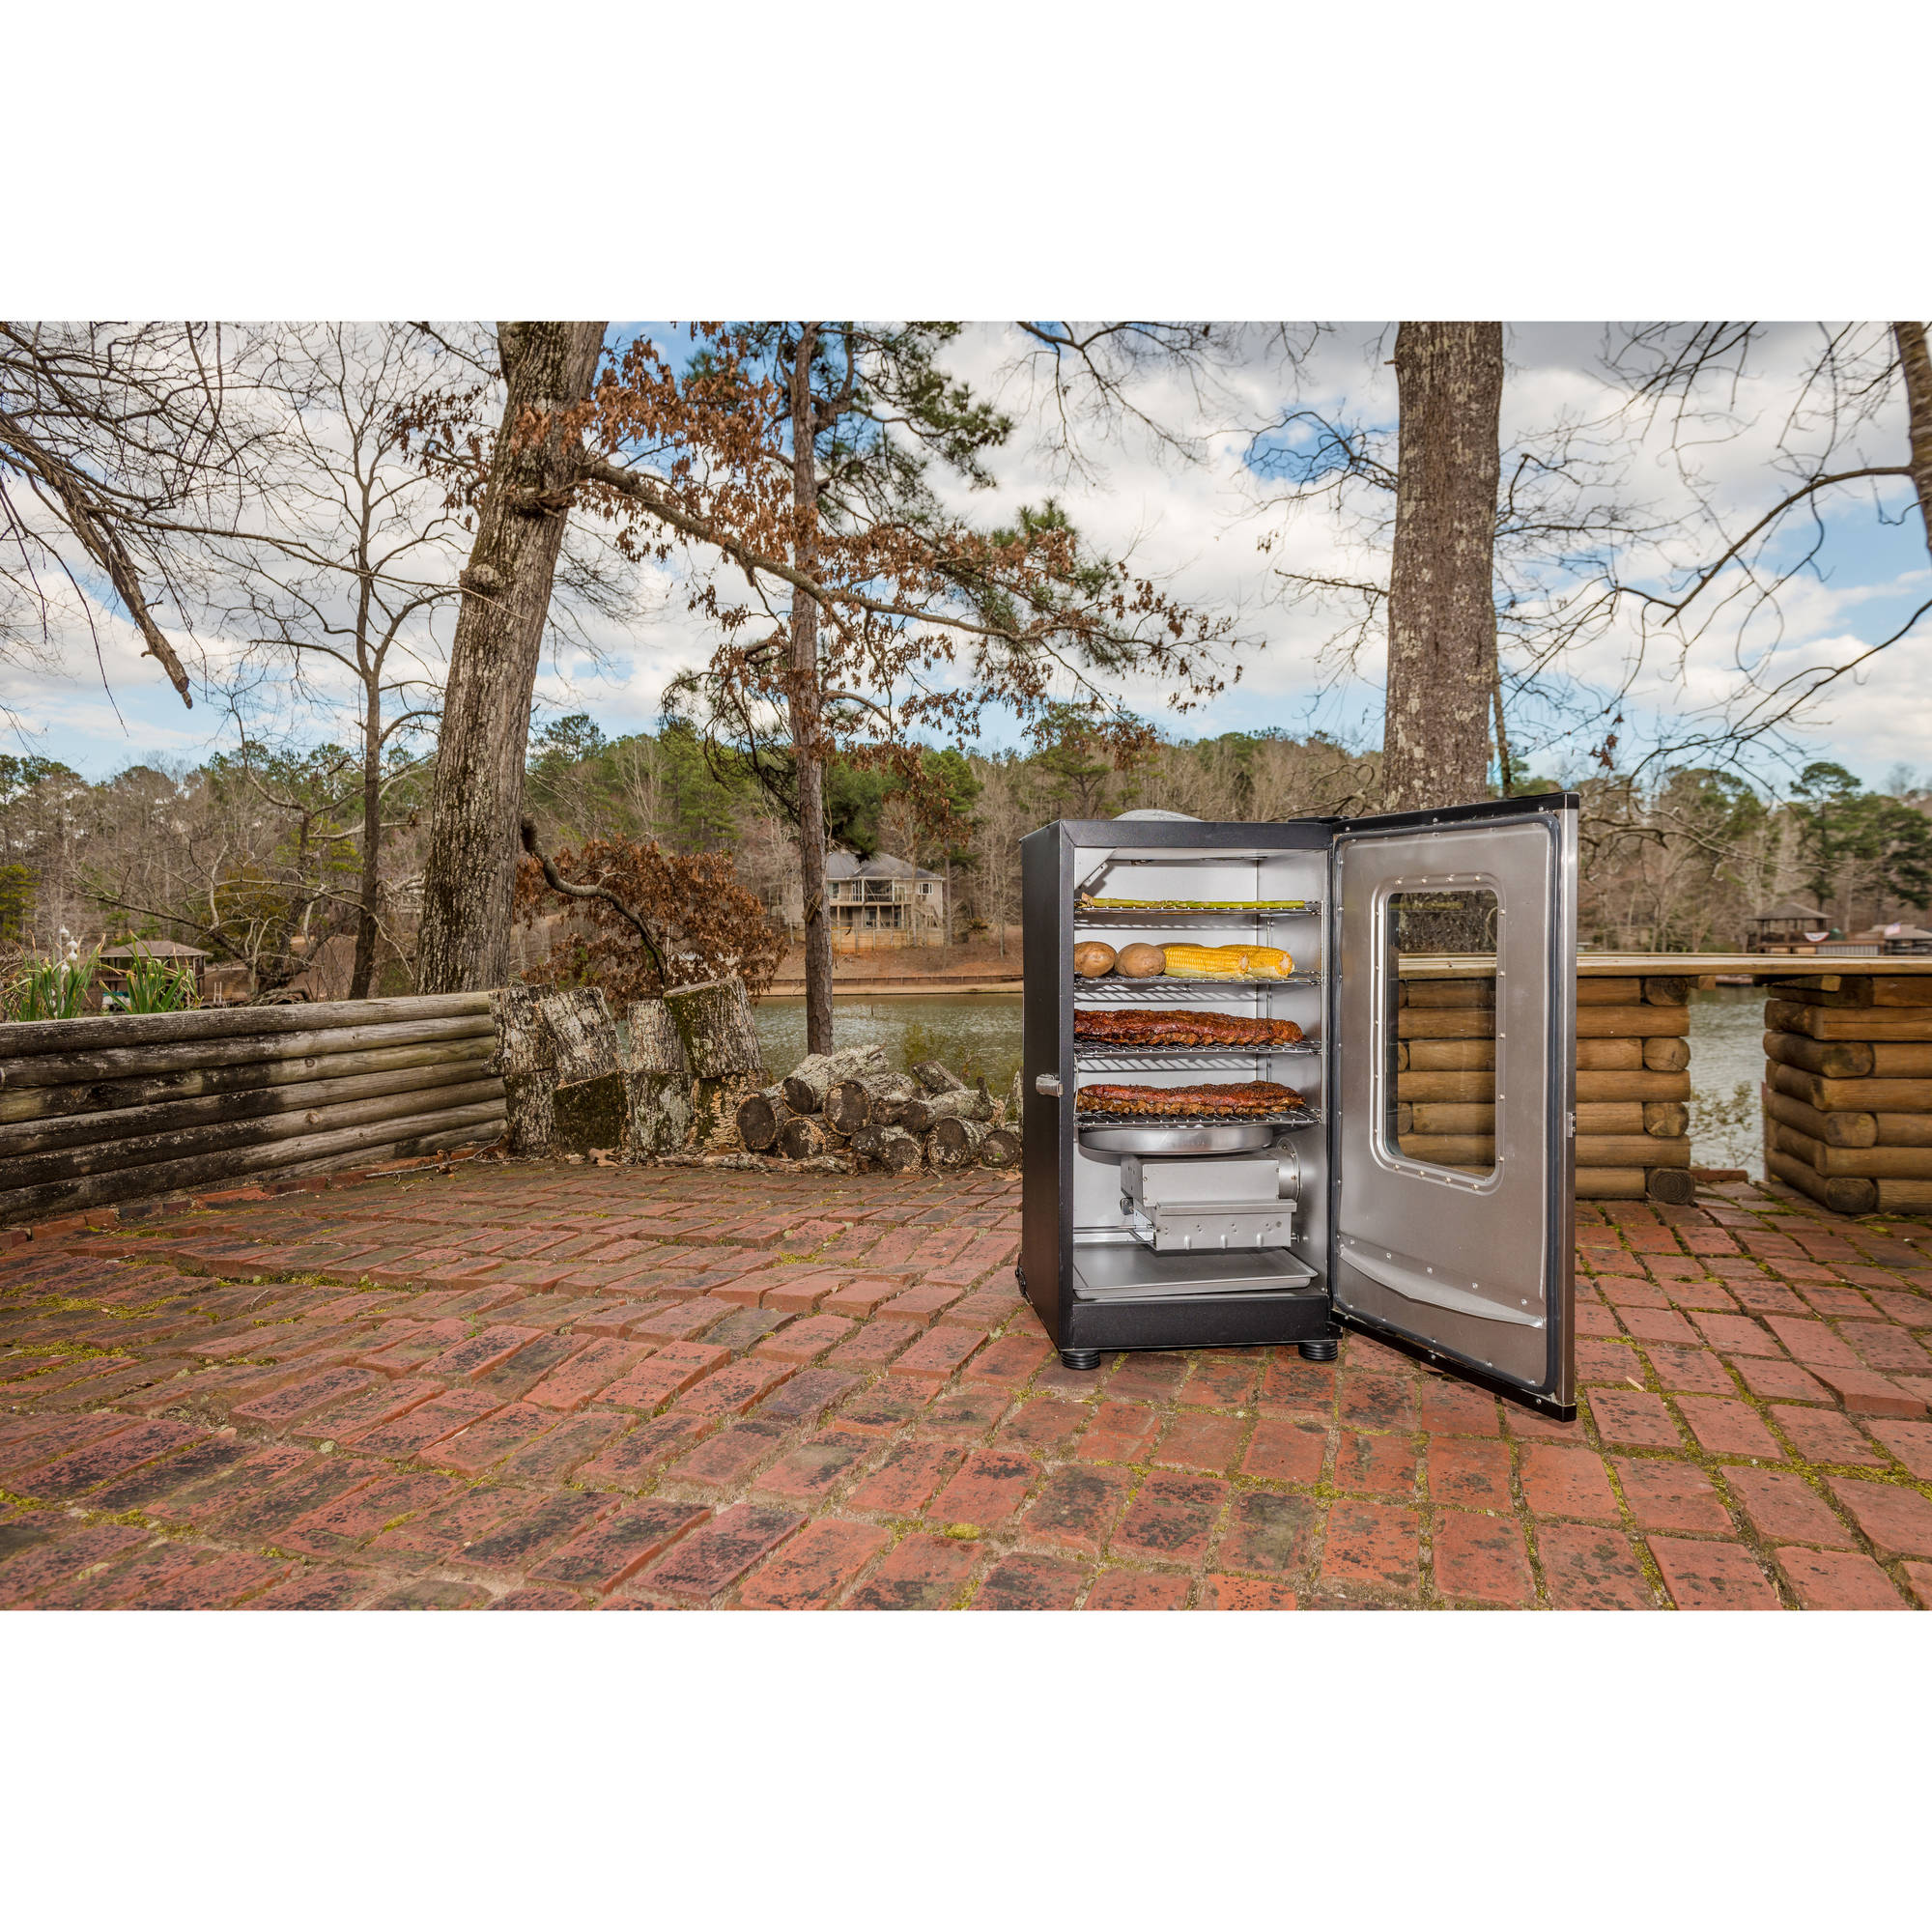 Masterbuilt 30" Electric Smoker with Window - image 3 of 5